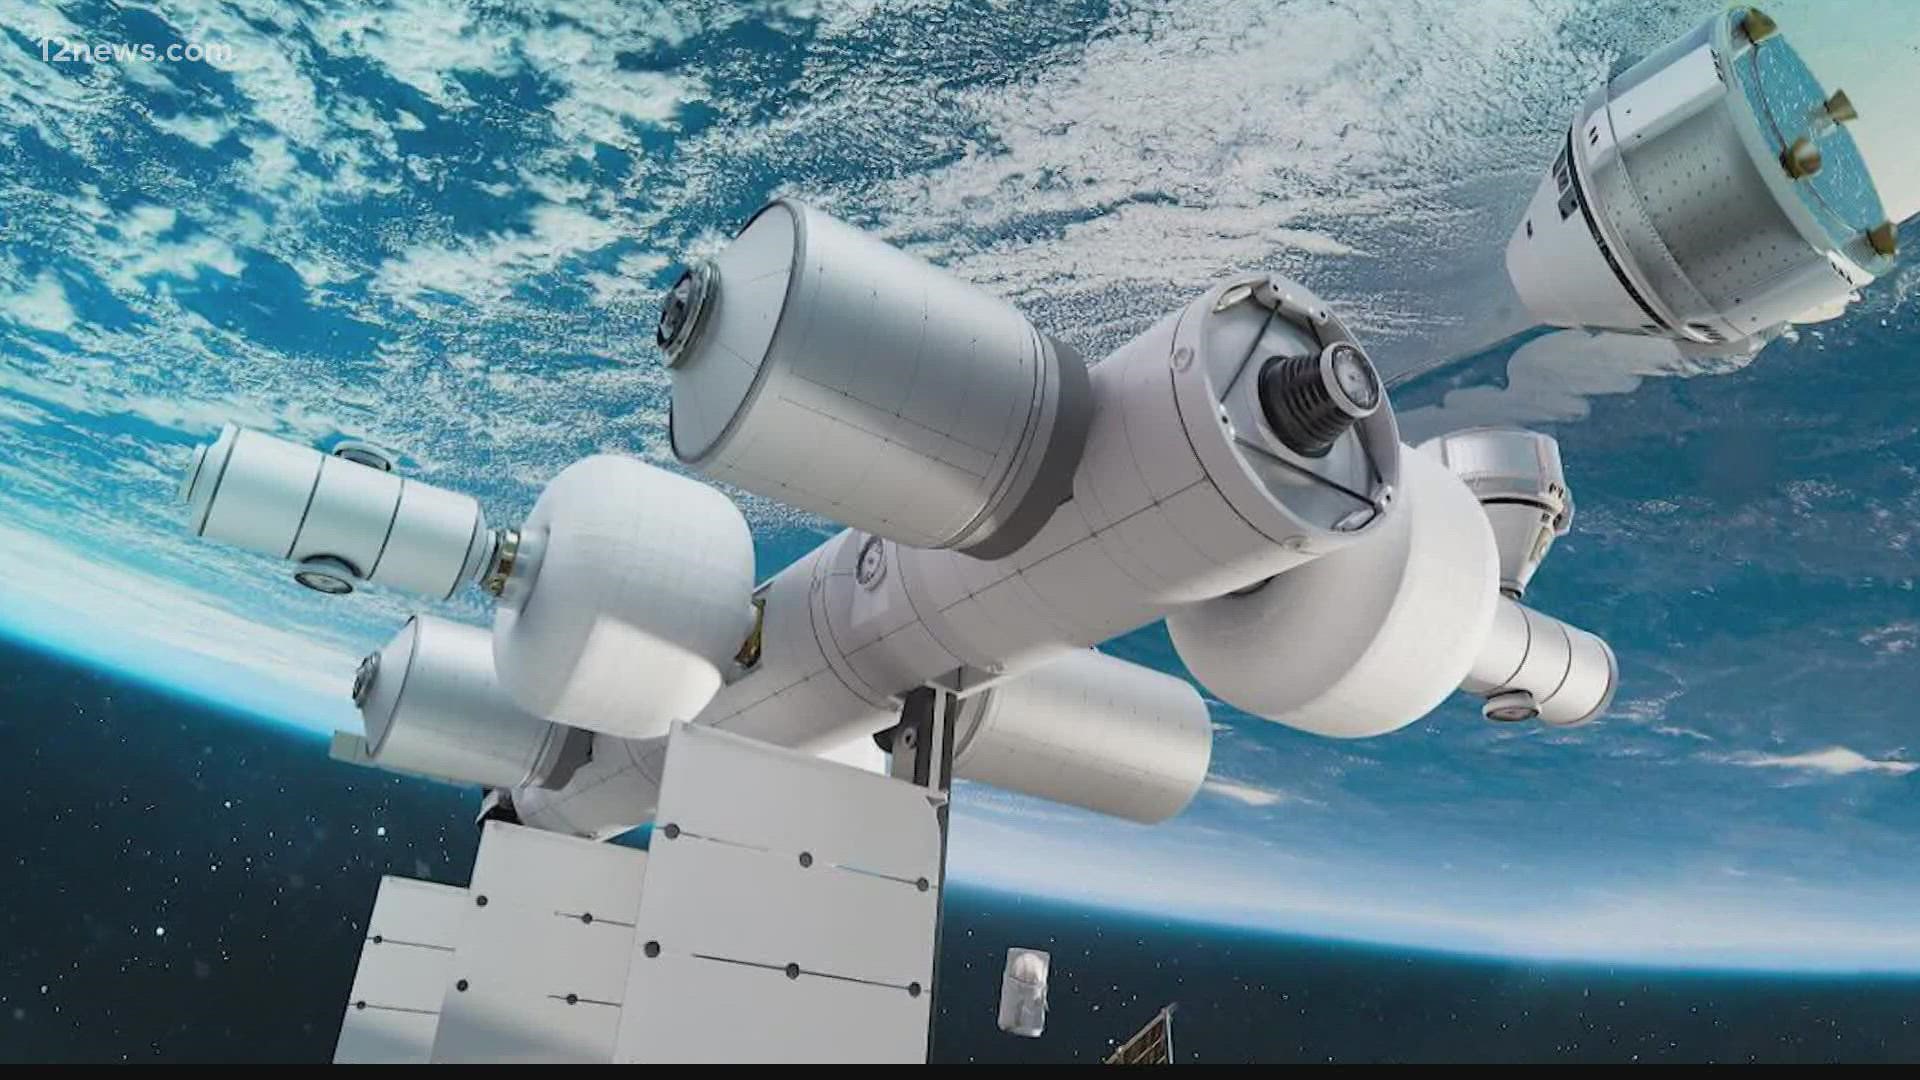 Aerospace company Blue Origin is partnering with several groups, including ASU, for its ambitious Orbital Reef project.